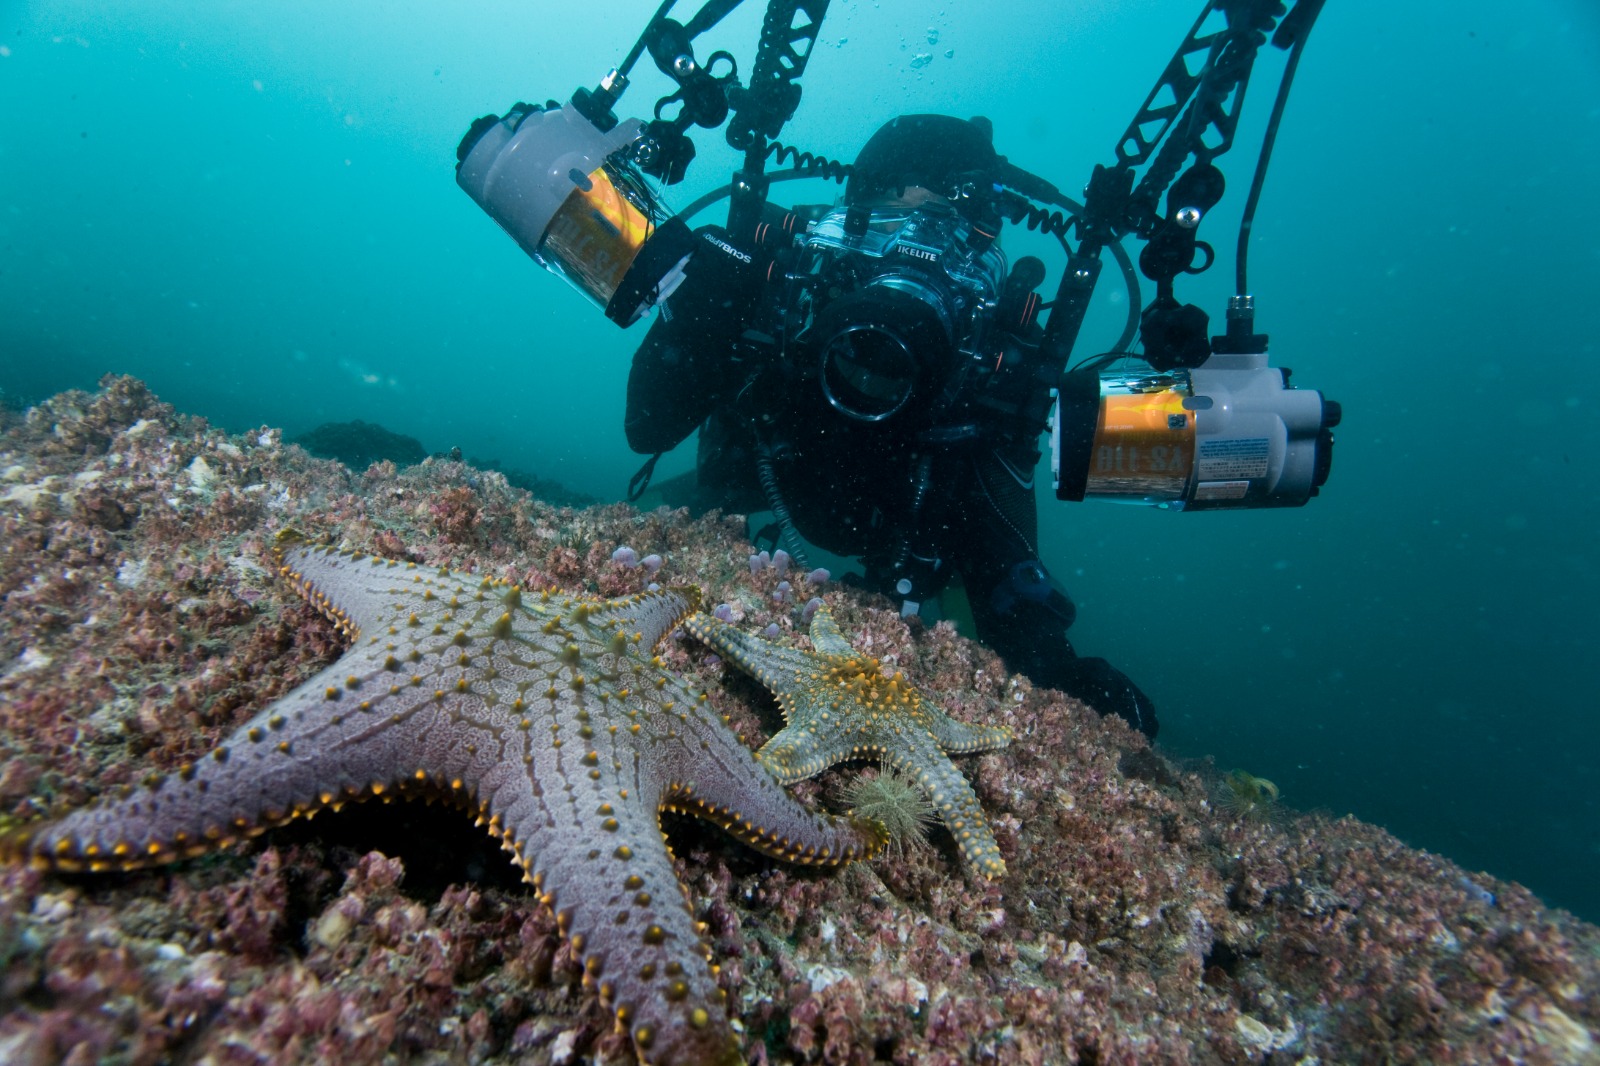 Pentaceraster Starfish being photographed by AquaMeridian Photographer within the Hong Kong South Hope Spot